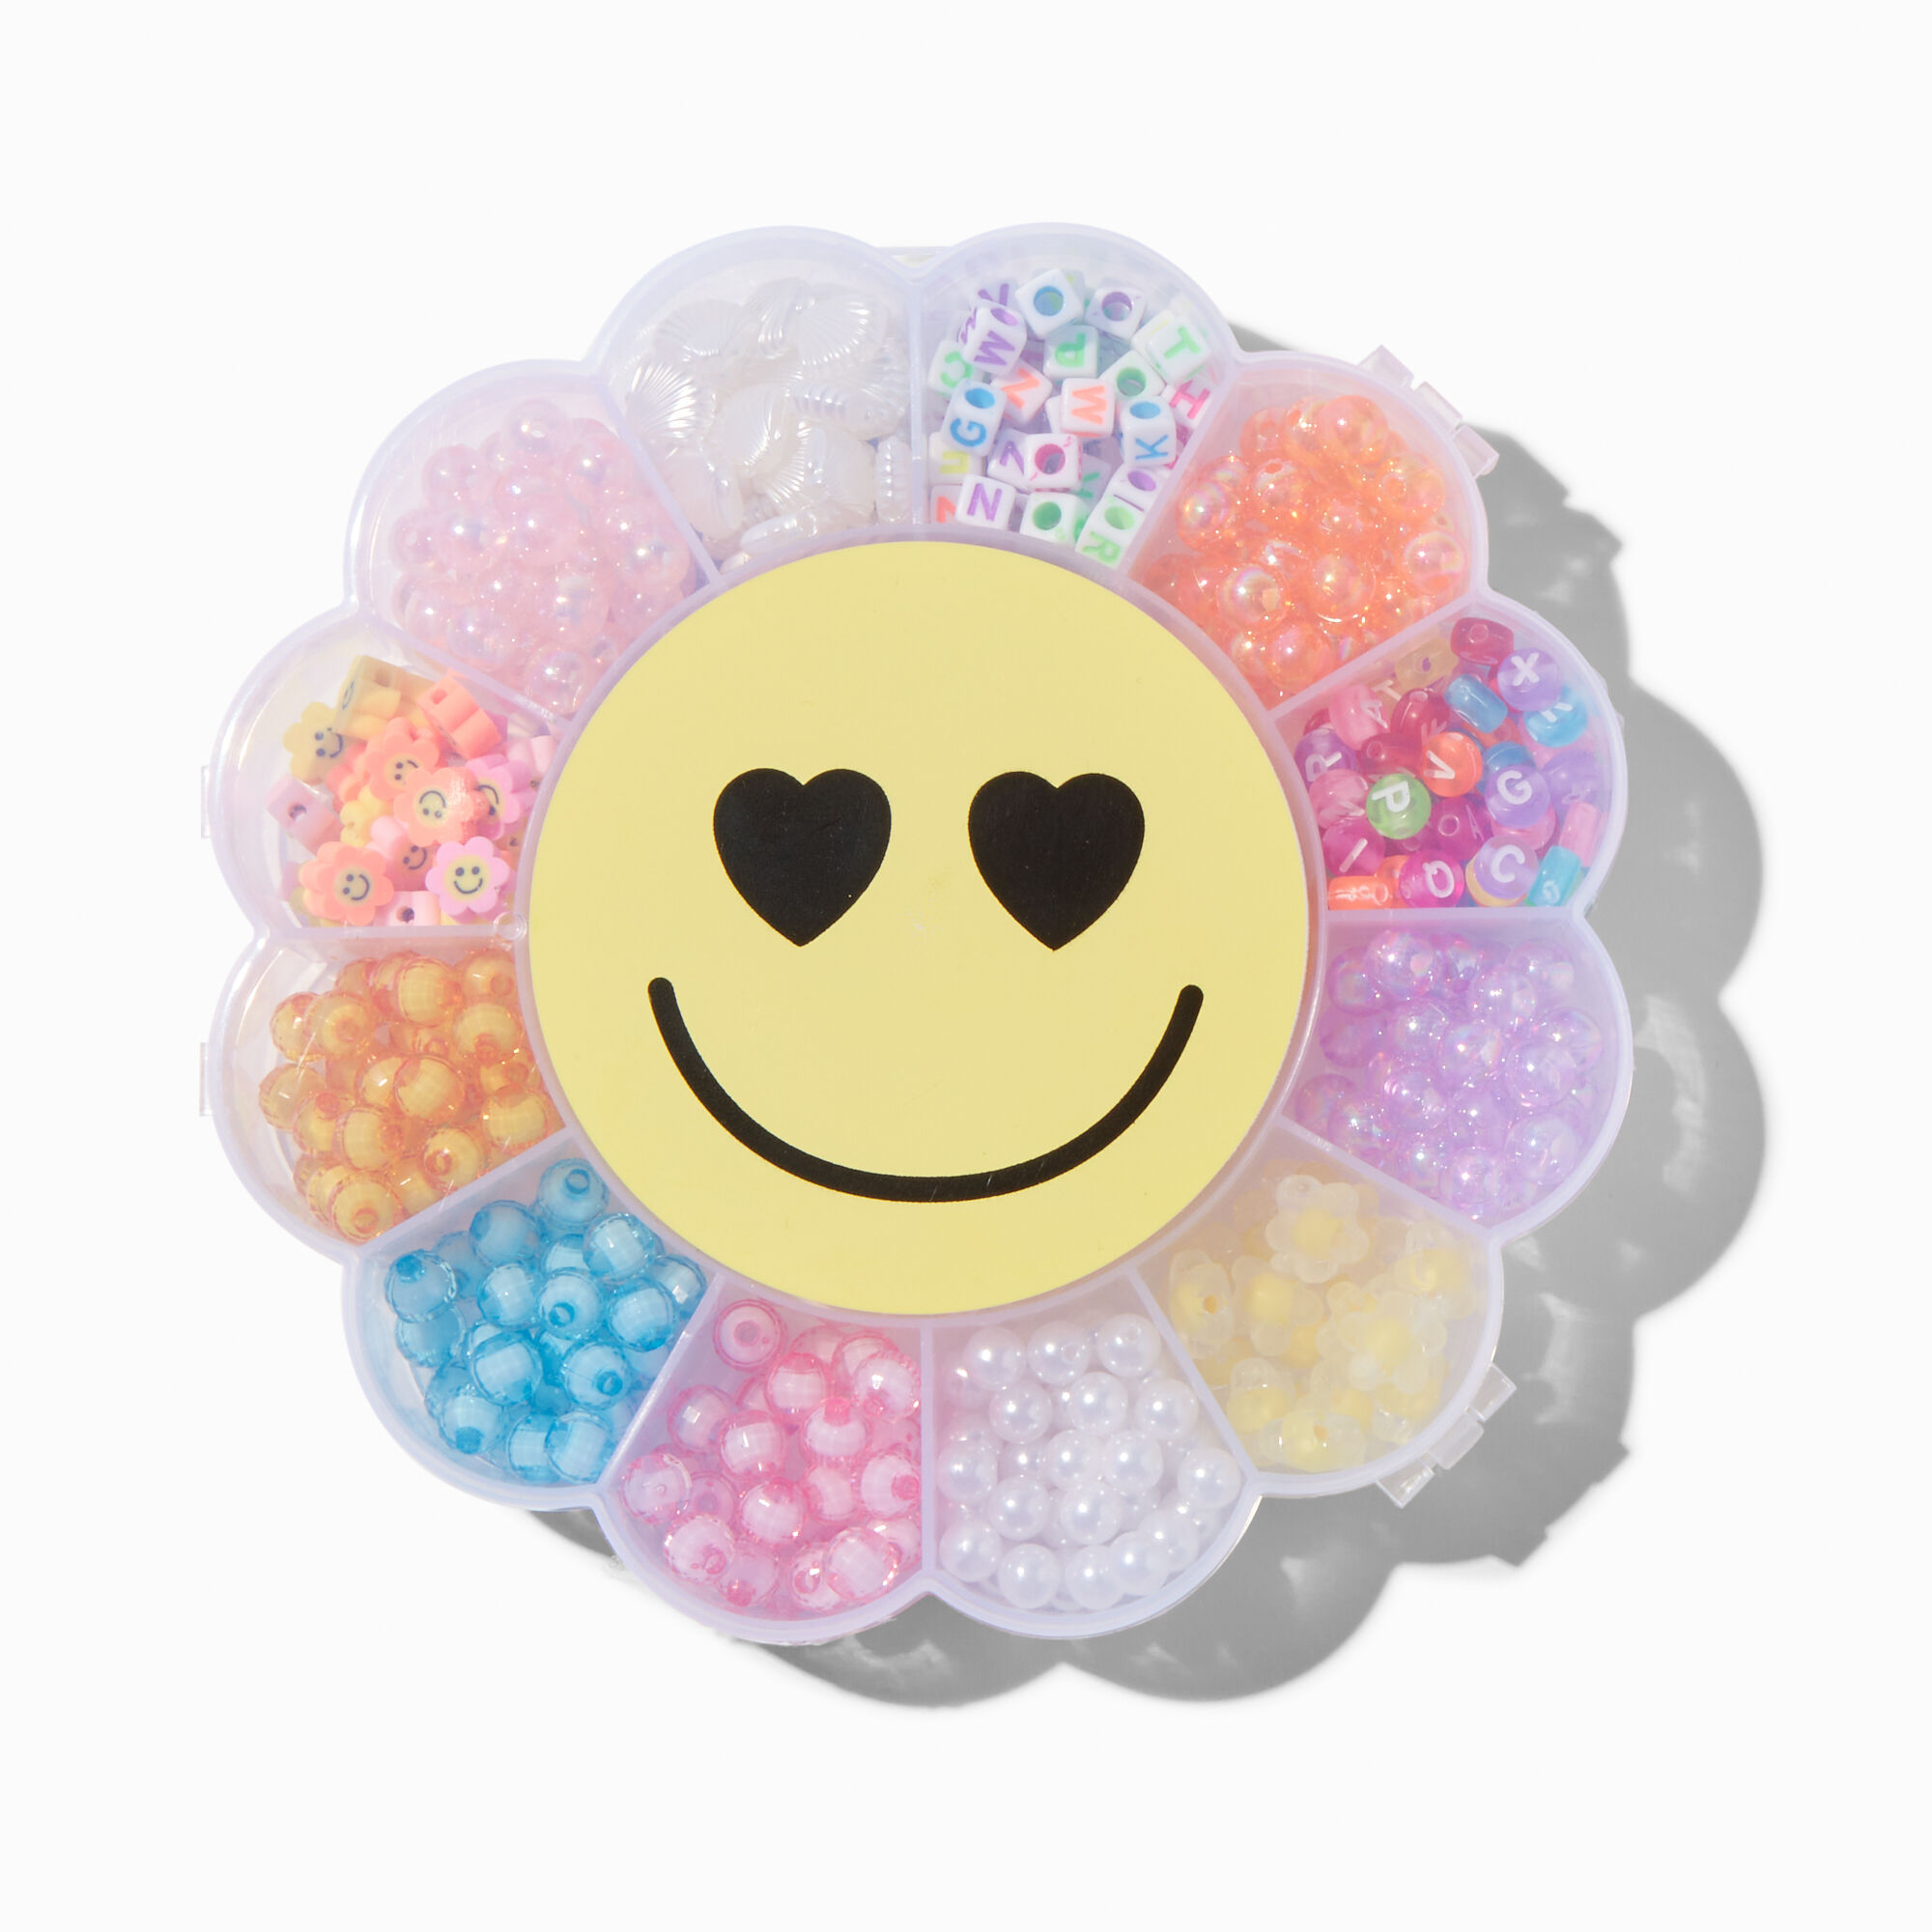 View Claires Happy Daisy MakeItYourself Bead Kit information